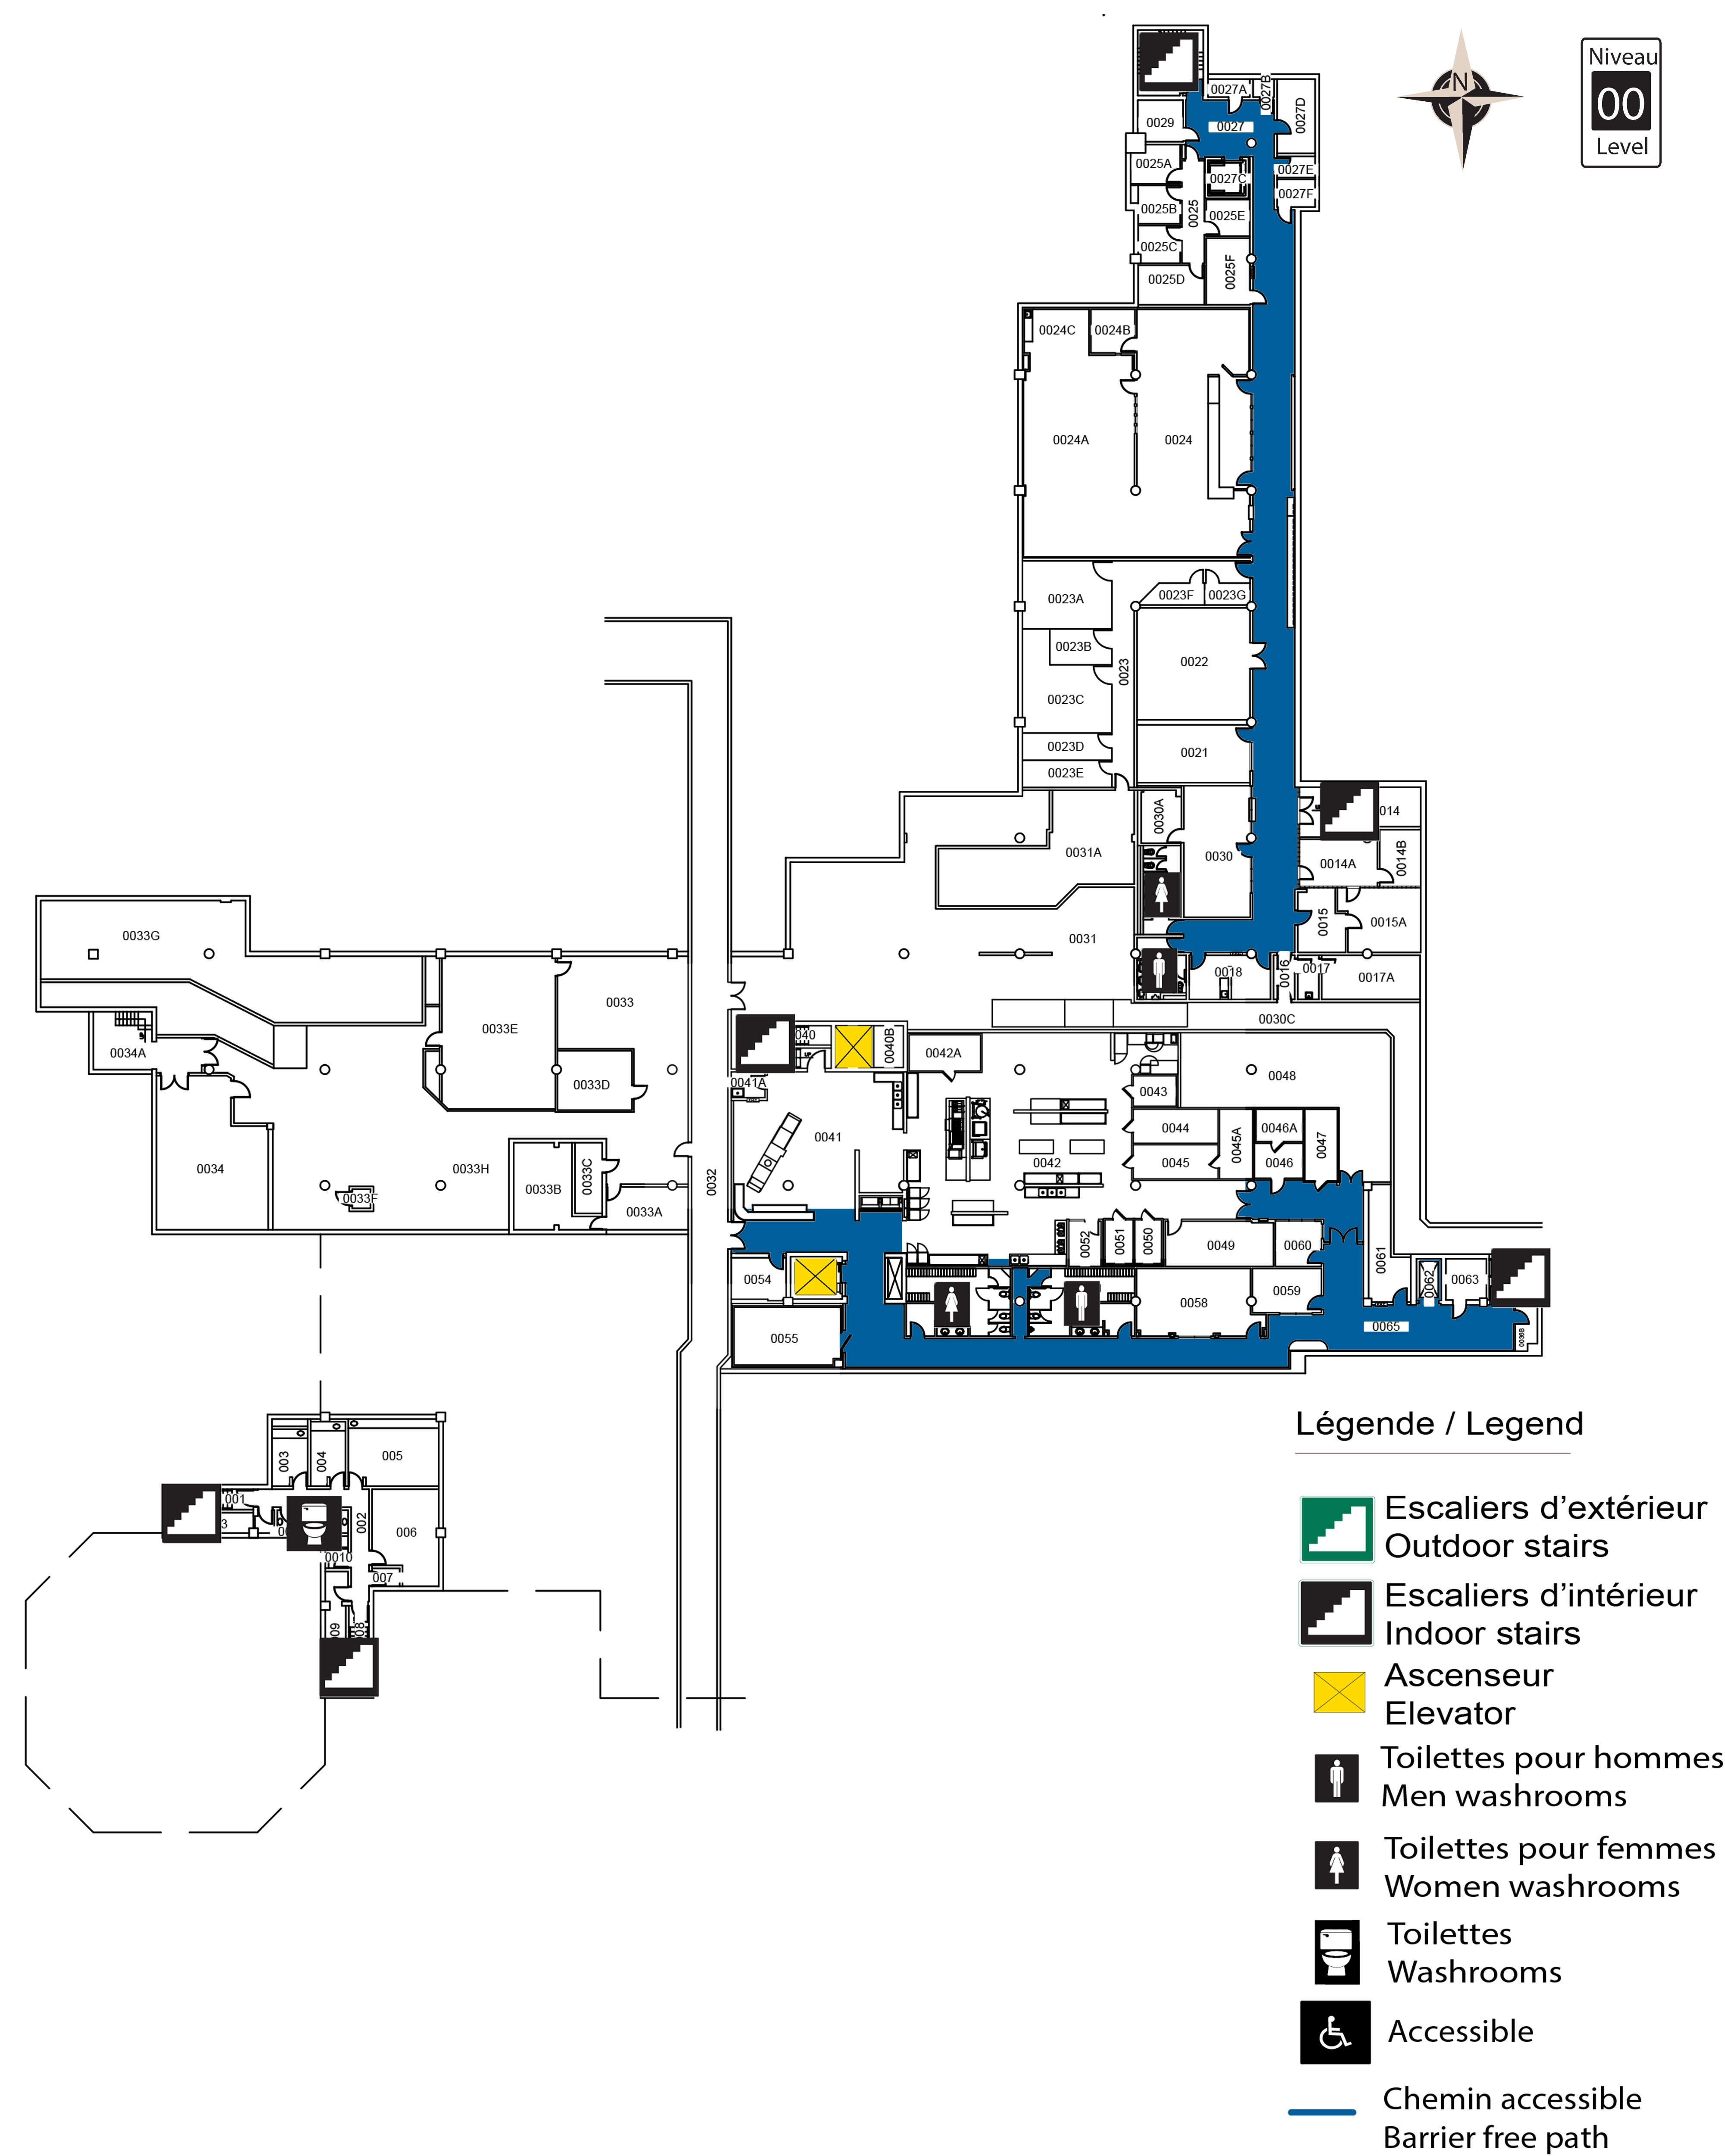 Accessible map of UCU level 00